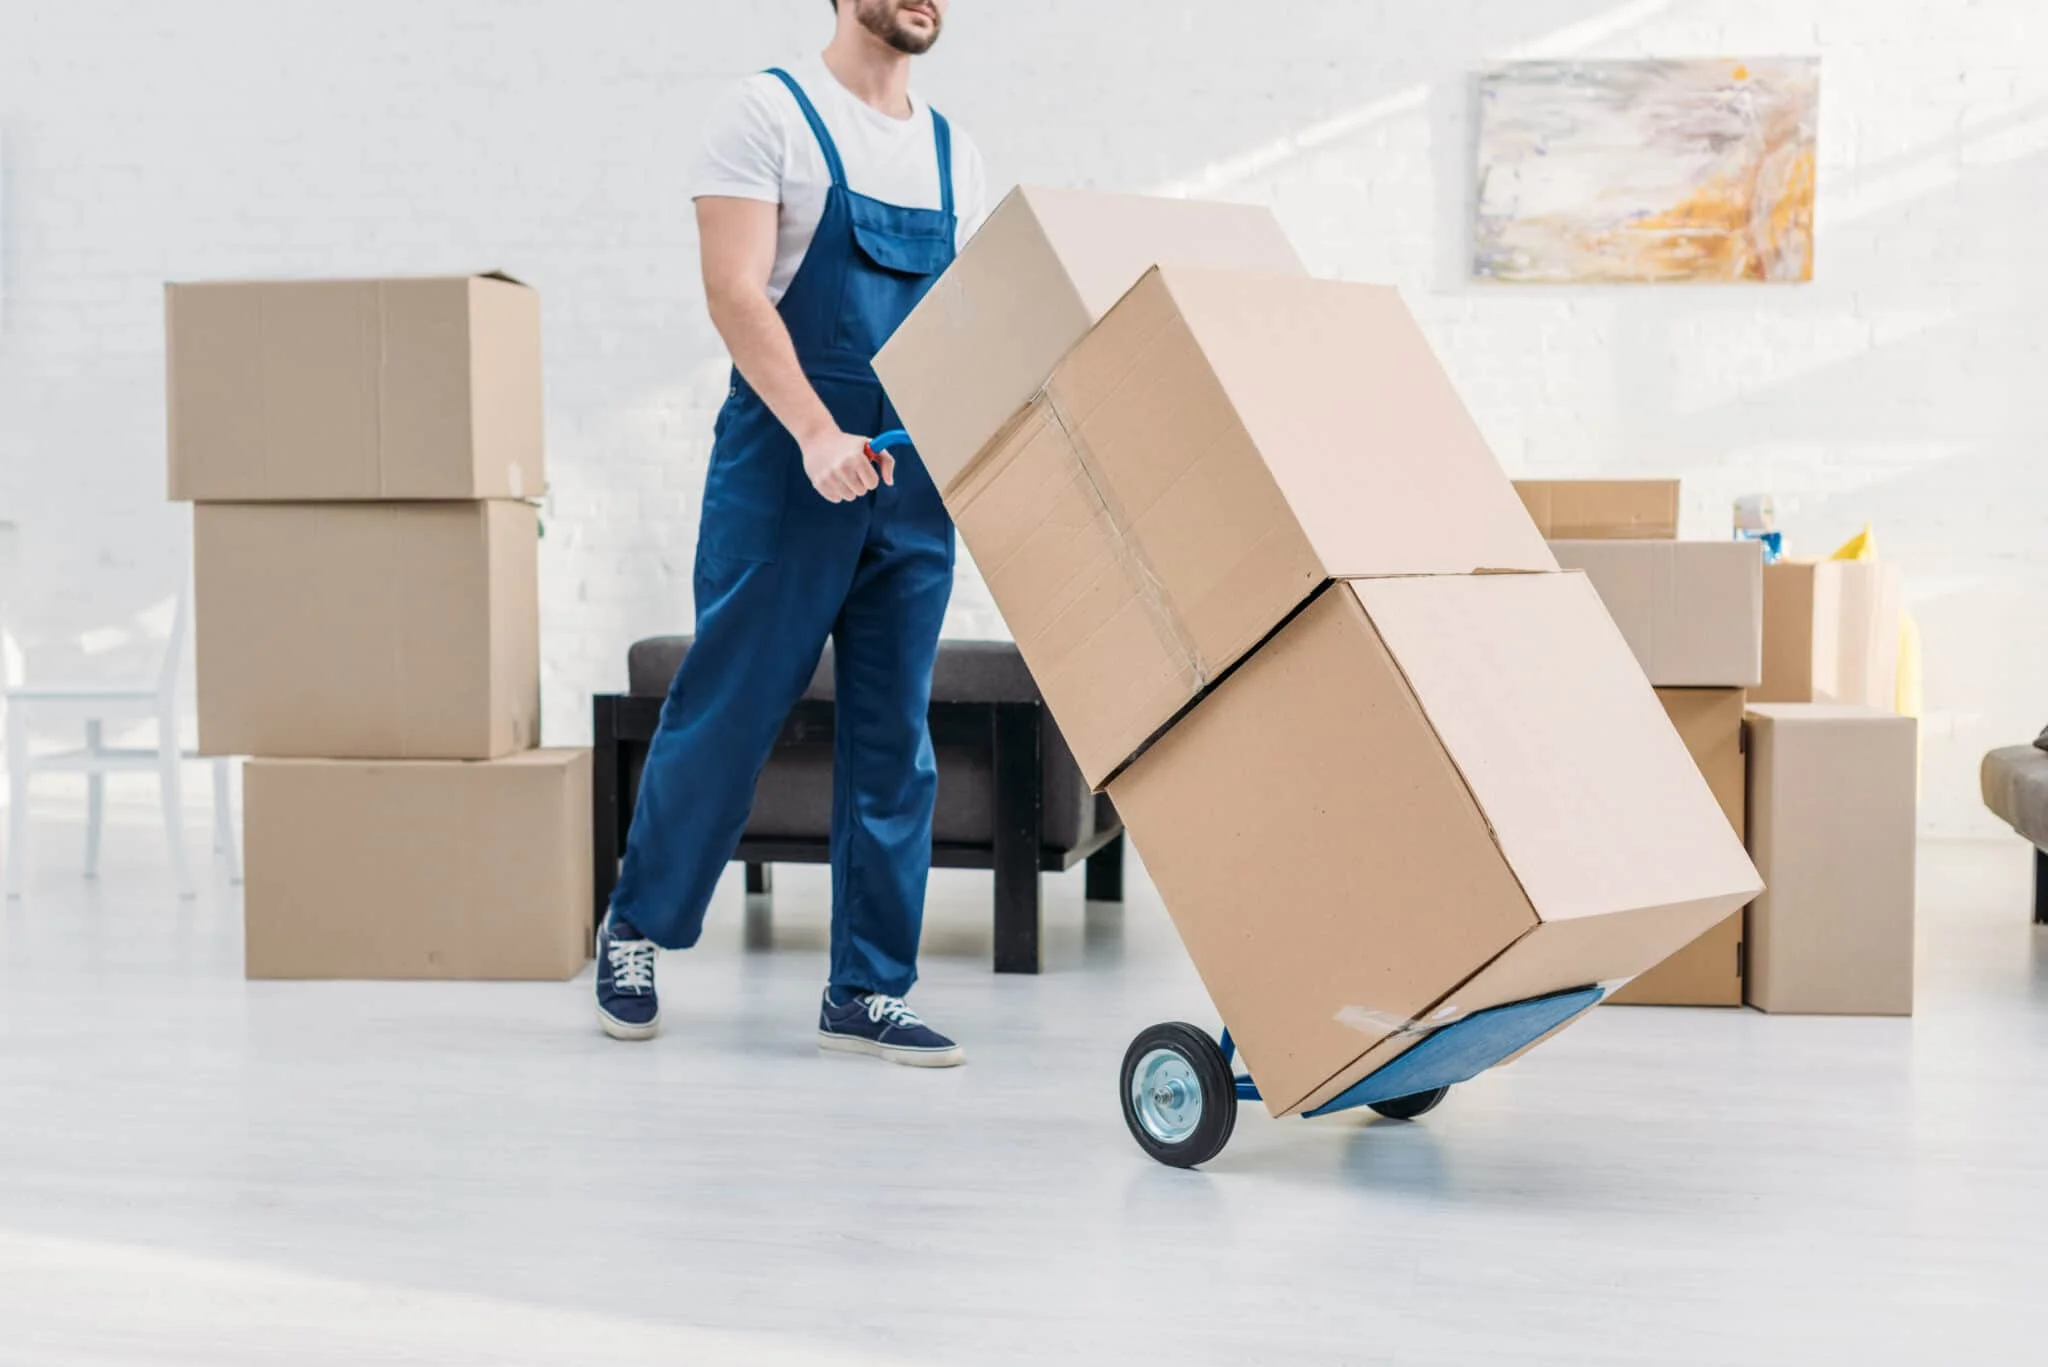 hire mover helpers